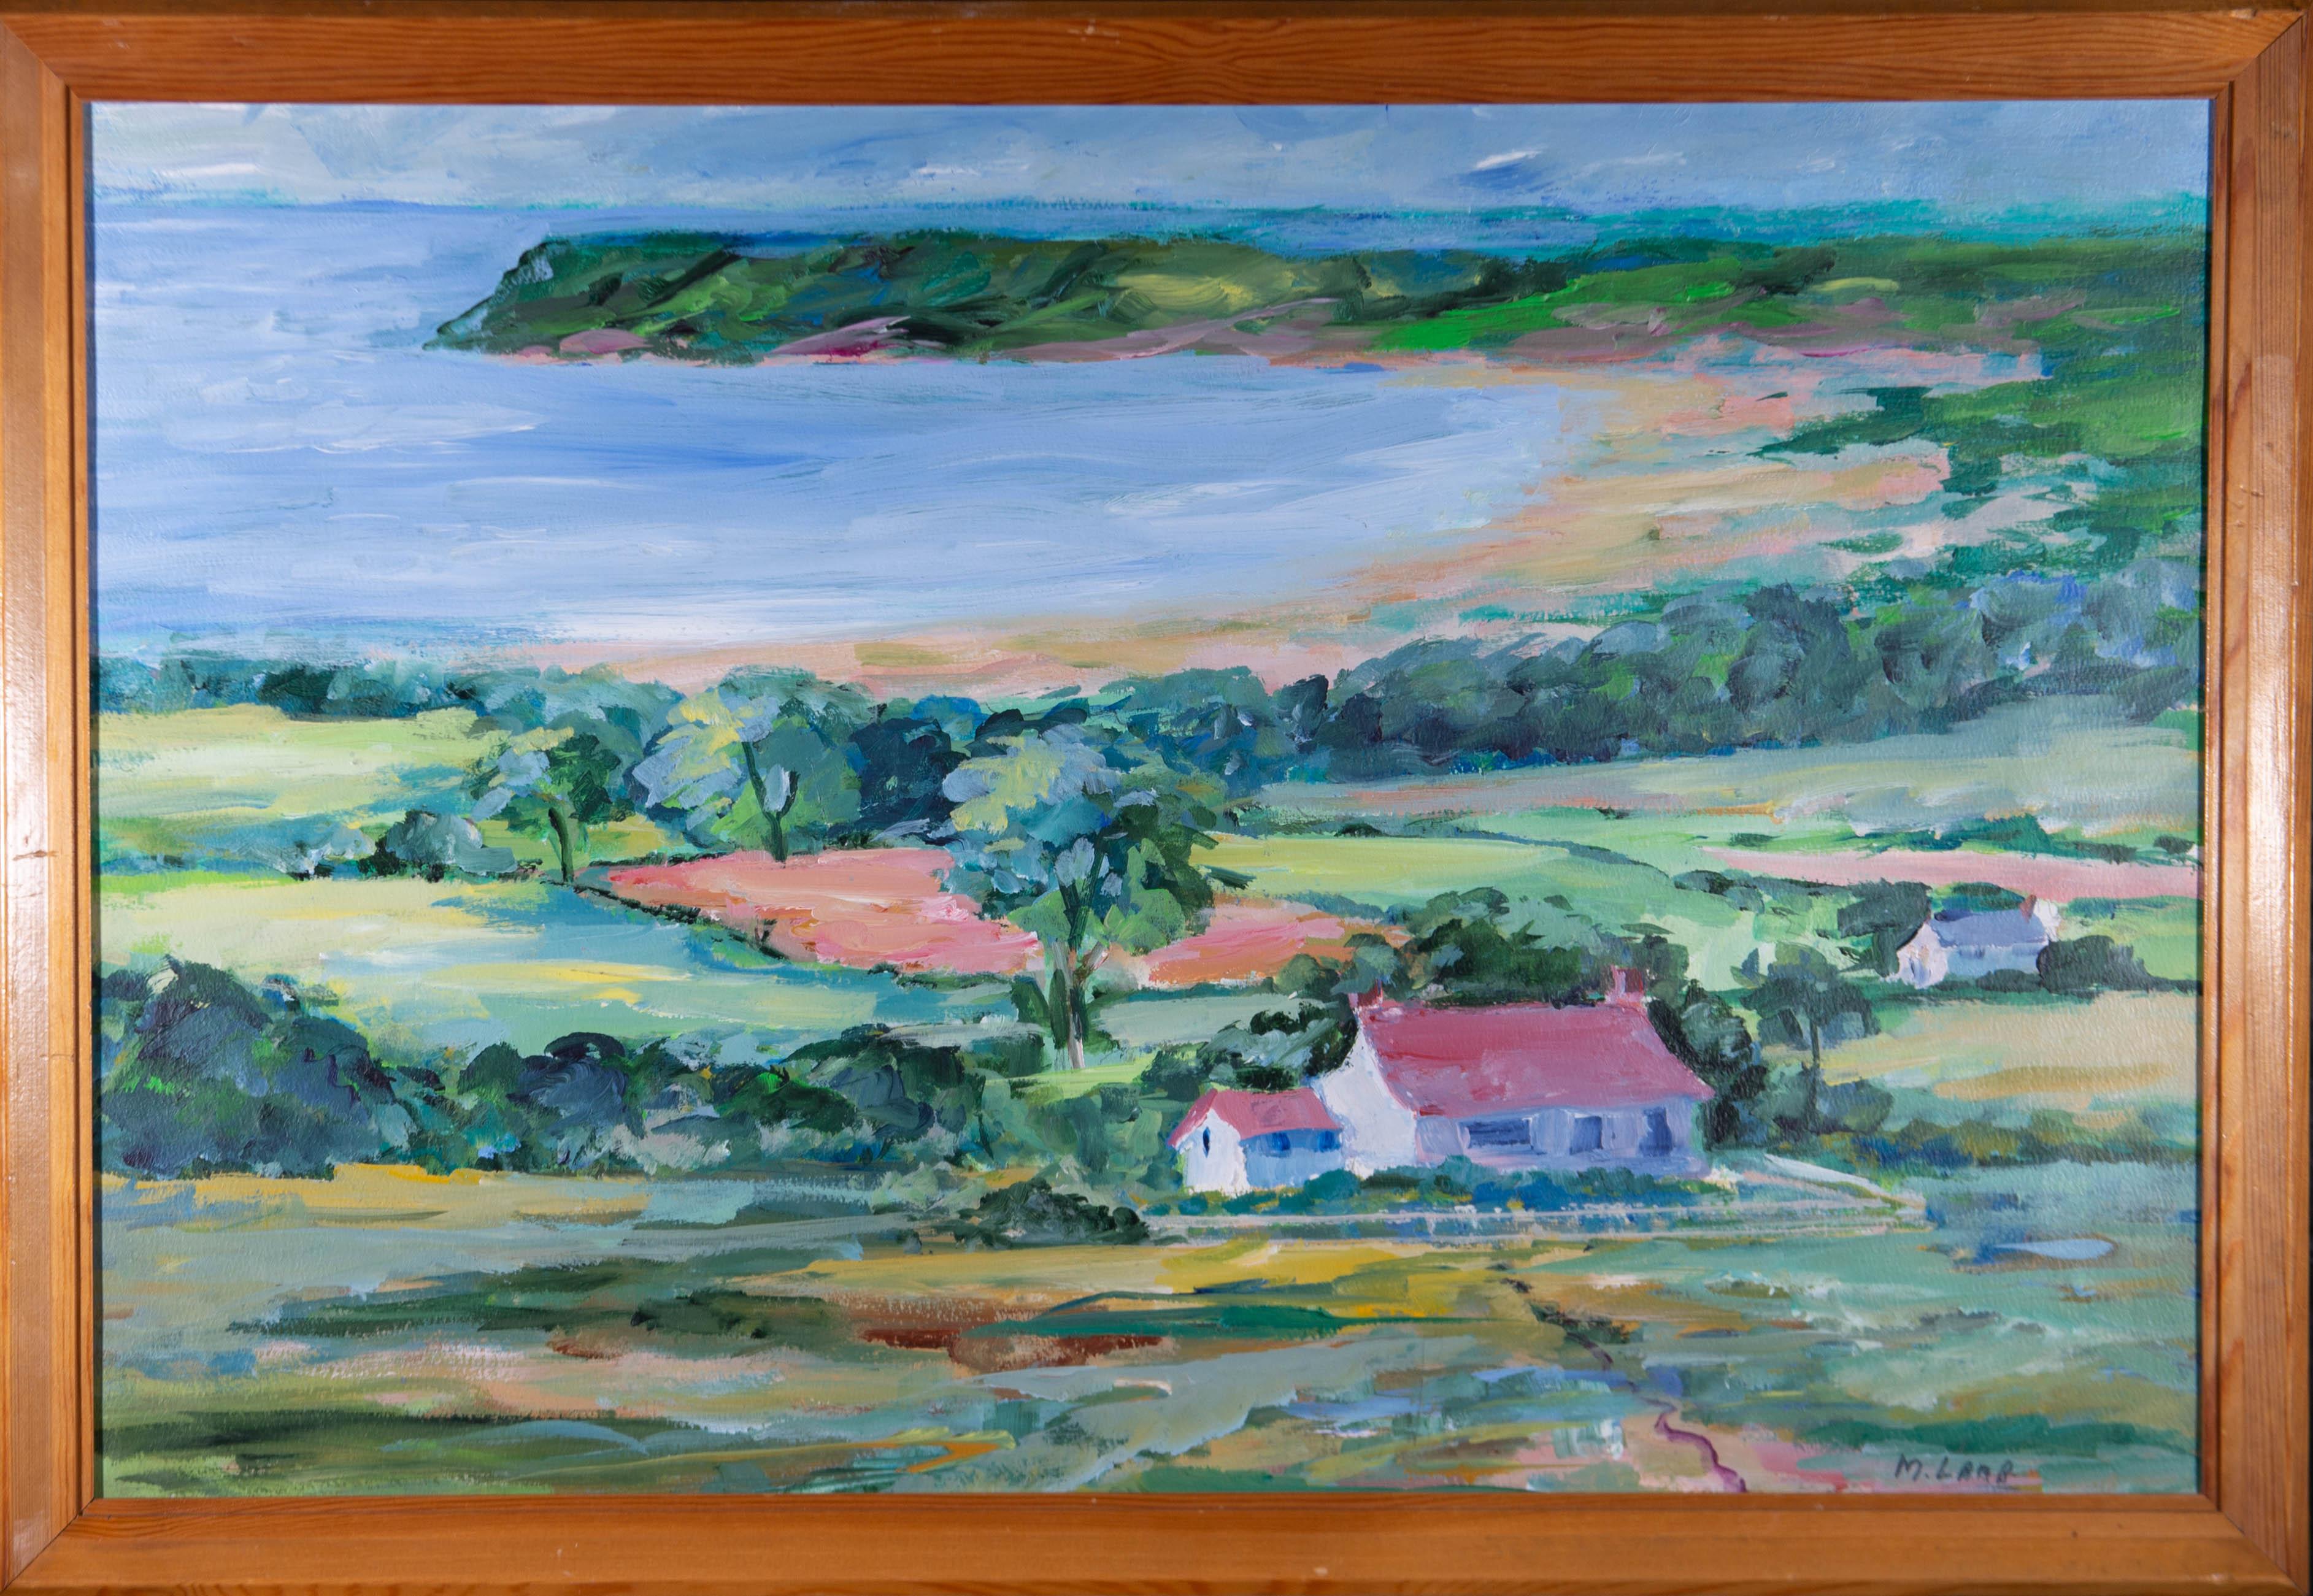 A coastal scene a the Gower Peninsula in Wales. Presented in a wooden frame. Signed to the lower-right edge. On board.
